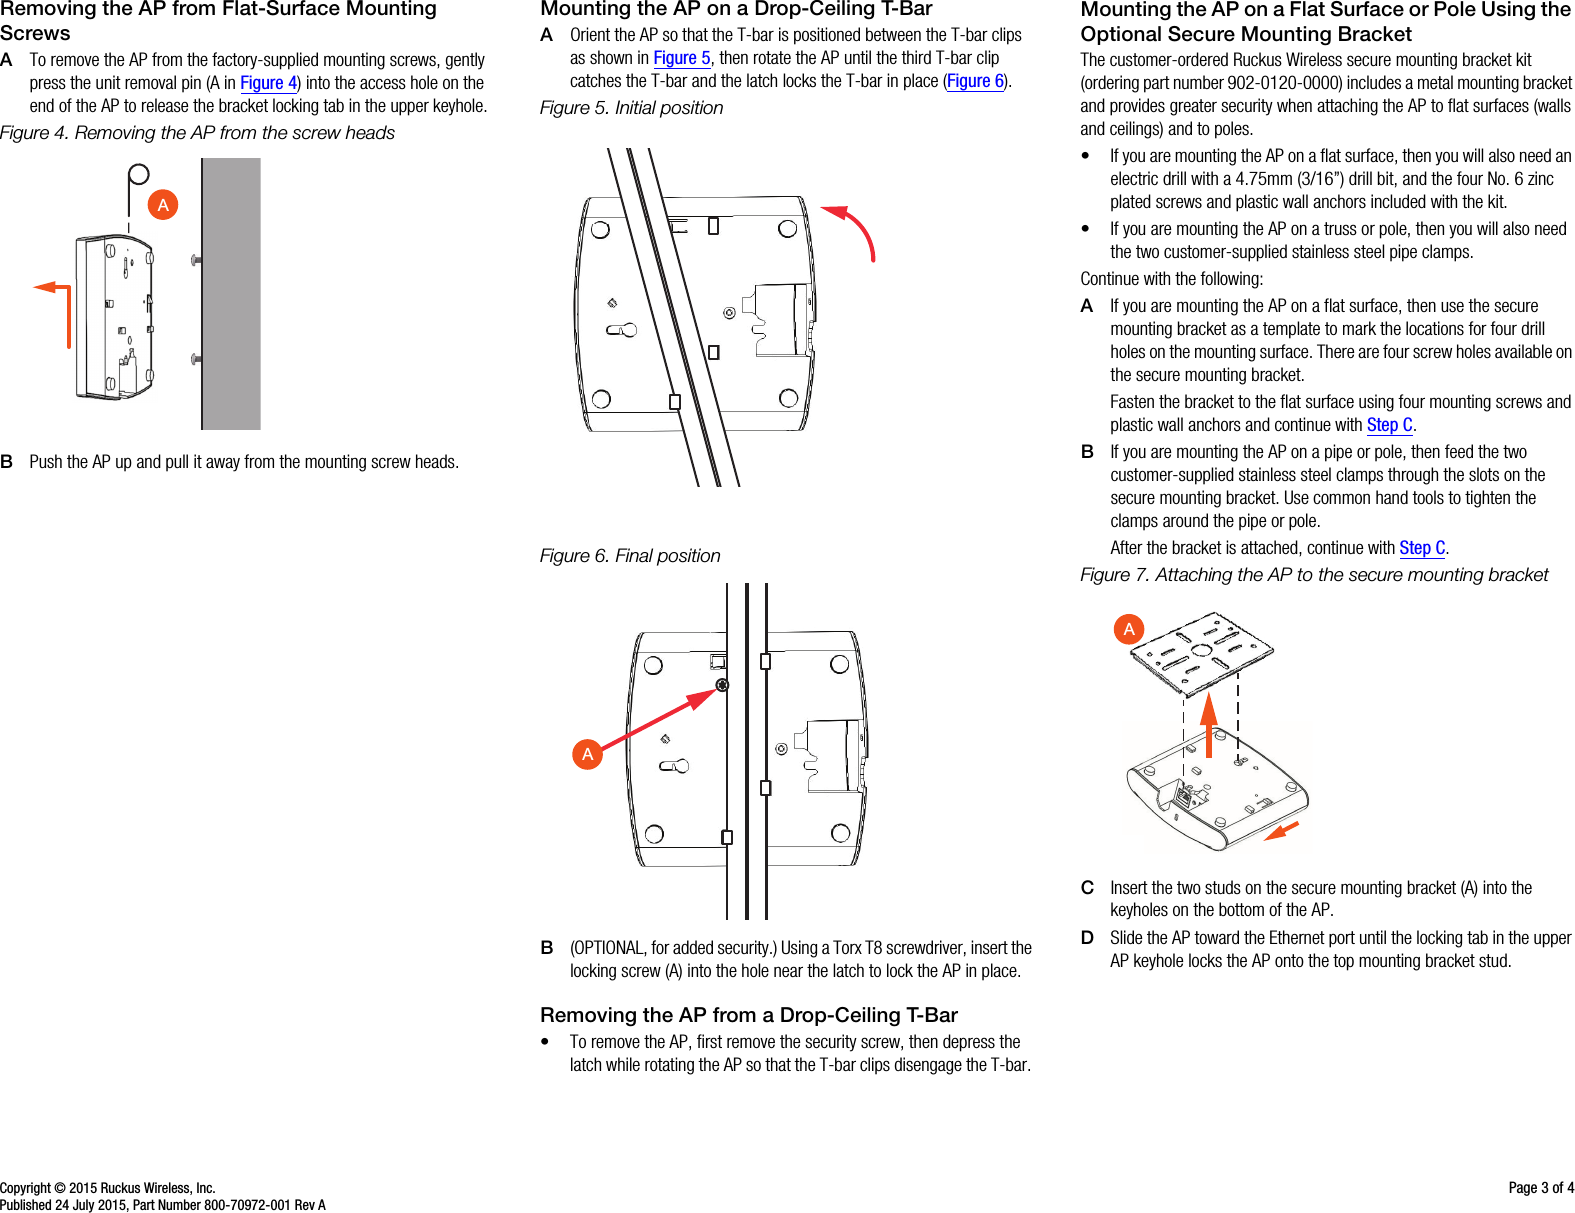 Copyright © 2015 Ruckus Wireless, Inc. Page 3 of 4Published 24 July 2015, Part Number 800-70972-001 Rev ARemoving the AP from Flat-Surface Mounting ScrewsATo remove the AP from the factory-supplied mounting screws, gently press the unit removal pin (A in Figure 4) into the access hole on the end of the AP to release the bracket locking tab in the upper keyhole.Figure 4. Removing the AP from the screw headsBPush the AP up and pull it away from the mounting screw heads.Mounting the AP on a Drop-Ceiling T-BarAOrient the AP so that the T-bar is positioned between the T-bar clips as shown in Figure 5, then rotate the AP until the third T-bar clip catches the T-bar and the latch locks the T-bar in place (Figure 6). Figure 5. Initial positionFigure 6. Final positionB(OPTIONAL, for added security.) Using a Torx T8 screwdriver, insert the locking screw (A) into the hole near the latch to lock the AP in place.Removing the AP from a Drop-Ceiling T-Bar• To remove the AP, first remove the security screw, then depress the latch while rotating the AP so that the T-bar clips disengage the T-bar. Mounting the AP on a Flat Surface or Pole Using the Optional Secure Mounting BracketThe customer-ordered Ruckus Wireless secure mounting bracket kit (ordering part number 902-0120-0000) includes a metal mounting bracket and provides greater security when attaching the AP to flat surfaces (walls and ceilings) and to poles. • If you are mounting the AP on a flat surface, then you will also need an electric drill with a 4.75mm (3/16”) drill bit, and the four No. 6 zinc plated screws and plastic wall anchors included with the kit. • If you are mounting the AP on a truss or pole, then you will also need the two customer-supplied stainless steel pipe clamps.Continue with the following:AIf you are mounting the AP on a flat surface, then use the secure mounting bracket as a template to mark the locations for four drill holes on the mounting surface. There are four screw holes available on the secure mounting bracket. Fasten the bracket to the flat surface using four mounting screws and plastic wall anchors and continue with Step C.BIf you are mounting the AP on a pipe or pole, then feed the two customer-supplied stainless steel clamps through the slots on the secure mounting bracket. Use common hand tools to tighten the clamps around the pipe or pole.After the bracket is attached, continue with Step C.Figure 7. Attaching the AP to the secure mounting bracketCInsert the two studs on the secure mounting bracket (A) into the keyholes on the bottom of the AP. DSlide the AP toward the Ethernet port until the locking tab in the upper AP keyhole locks the AP onto the top mounting bracket stud.AAA